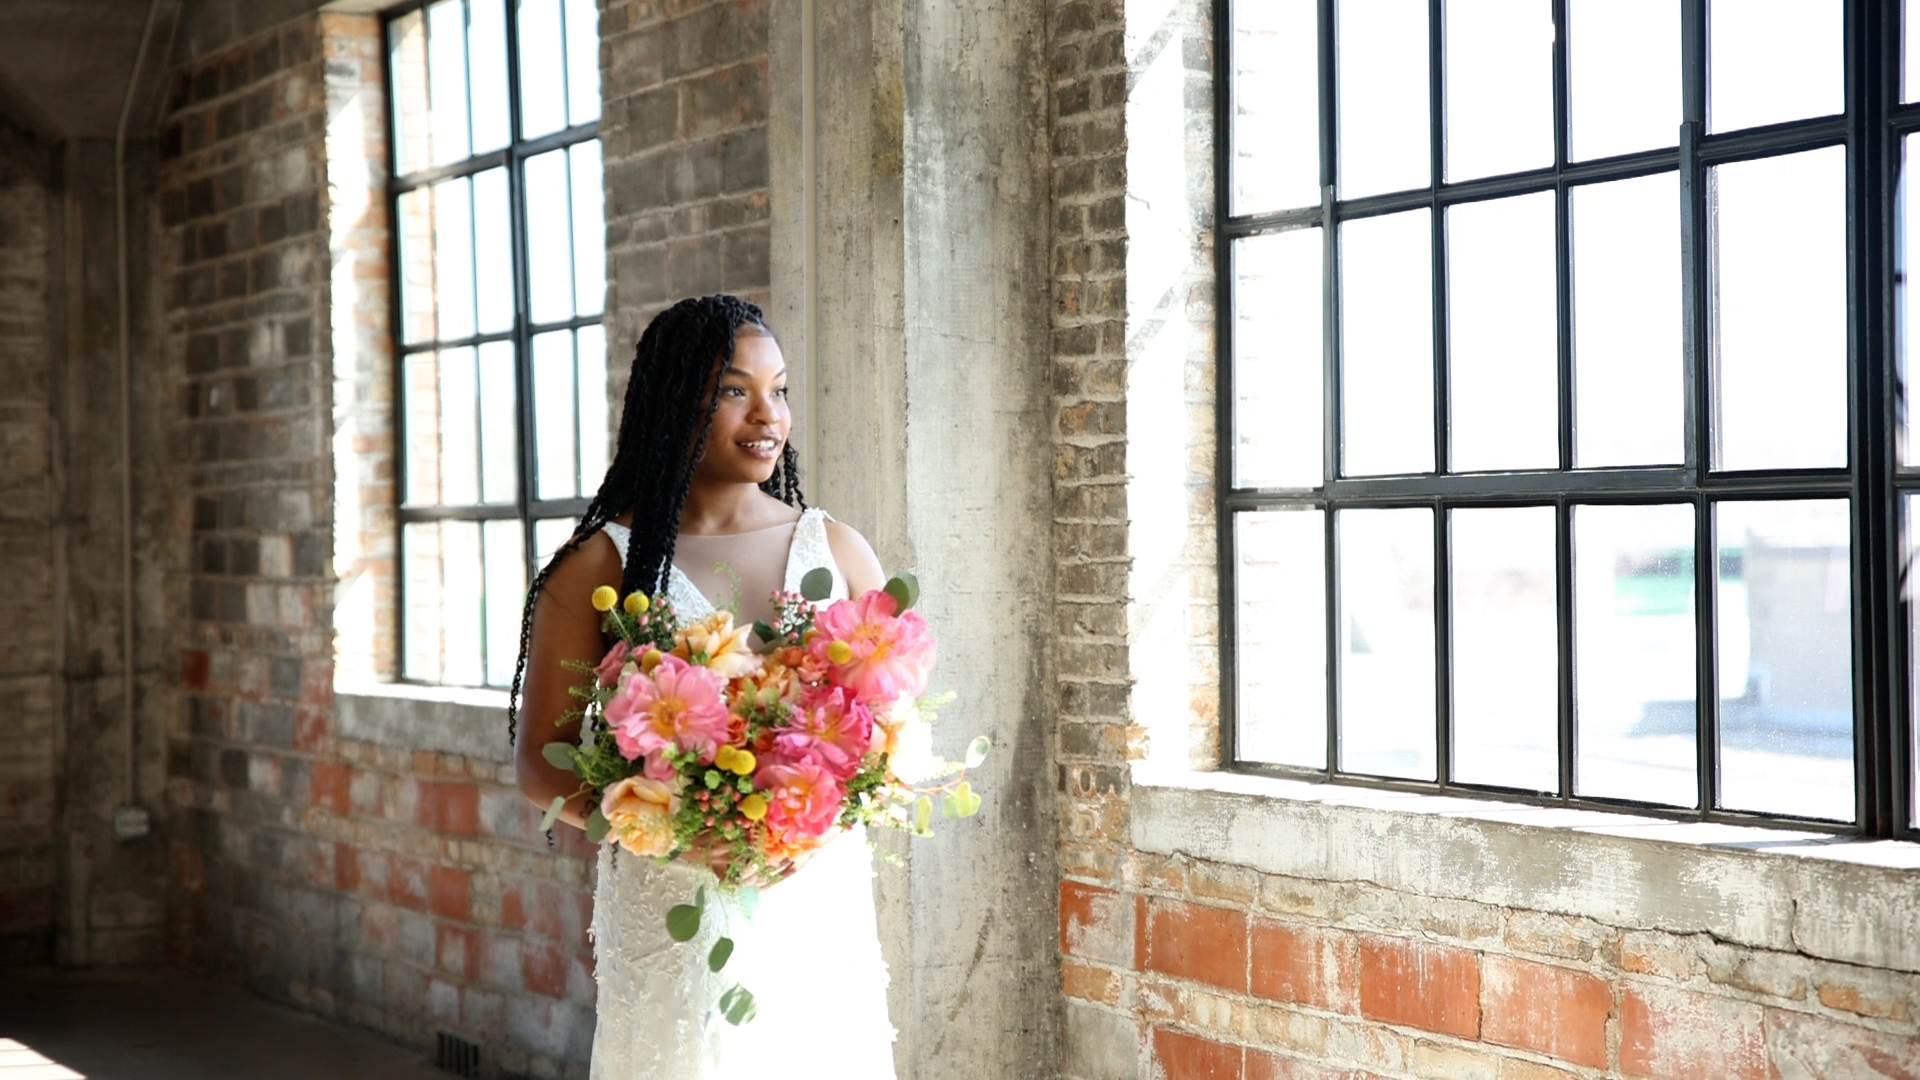 A bride stands in a brick building holding bright pink and yellow flower bouquet looking out a window at one of the best minneapolis wedding venues